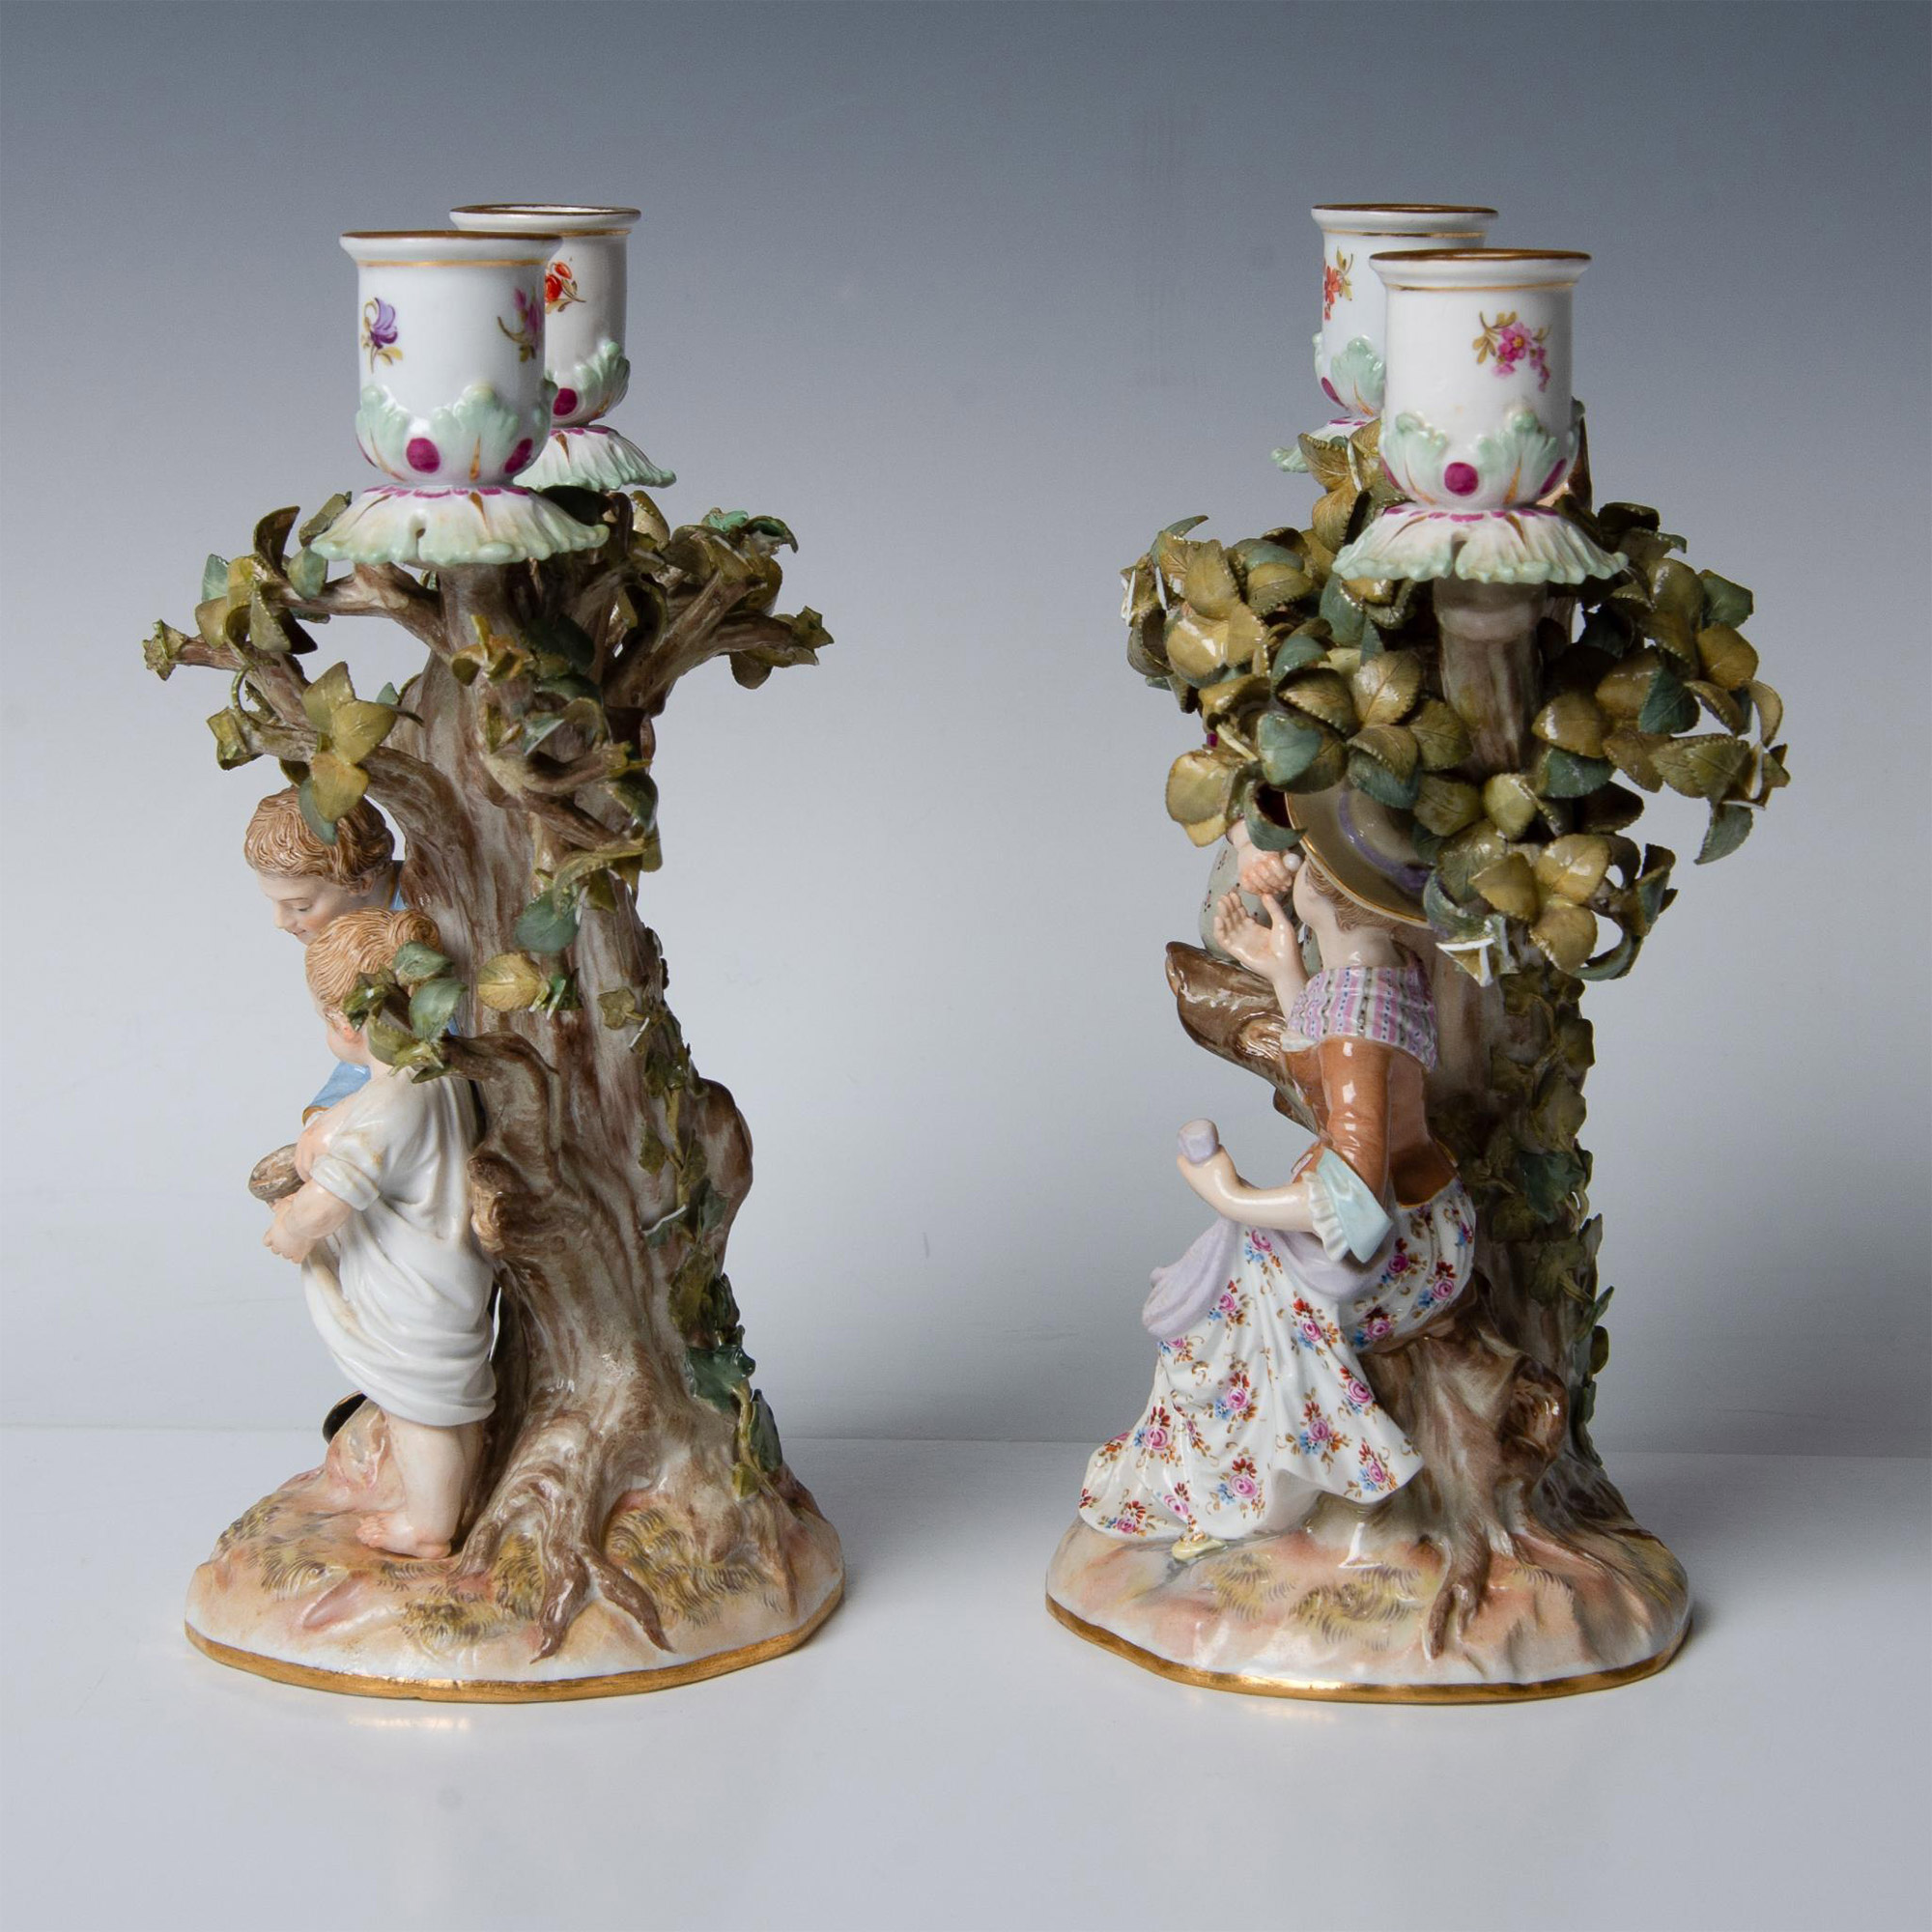 Pair of Meissen Porcelain Candle Holders, Egg Thieves - Image 2 of 9